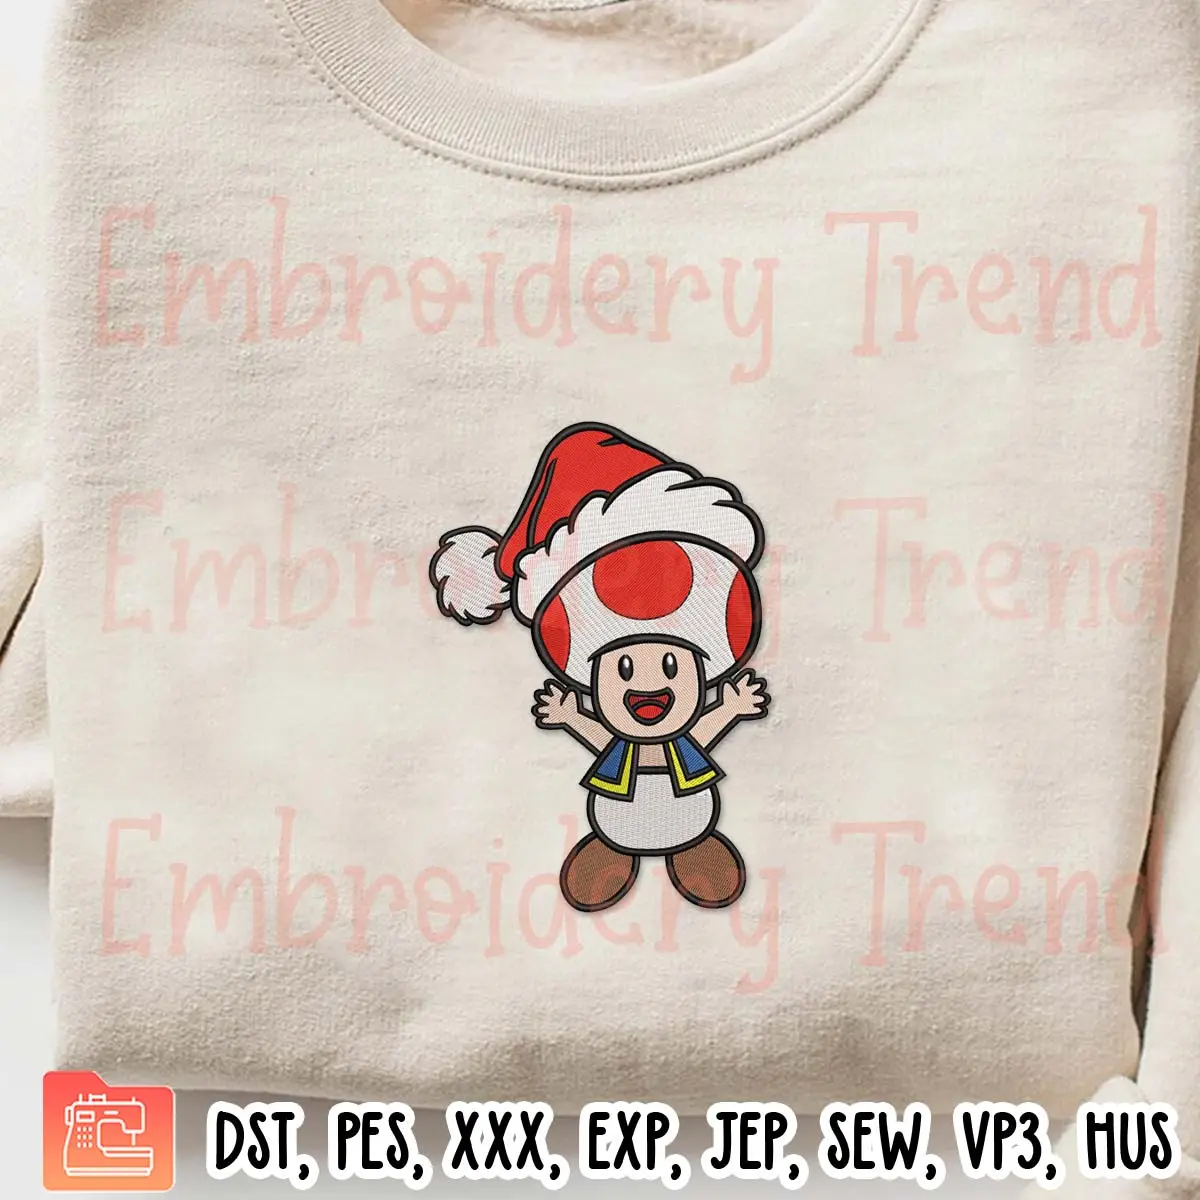 Toad Mario Embroidery Design, Cute Toad Christmas Embroidery Digitizing Pes File